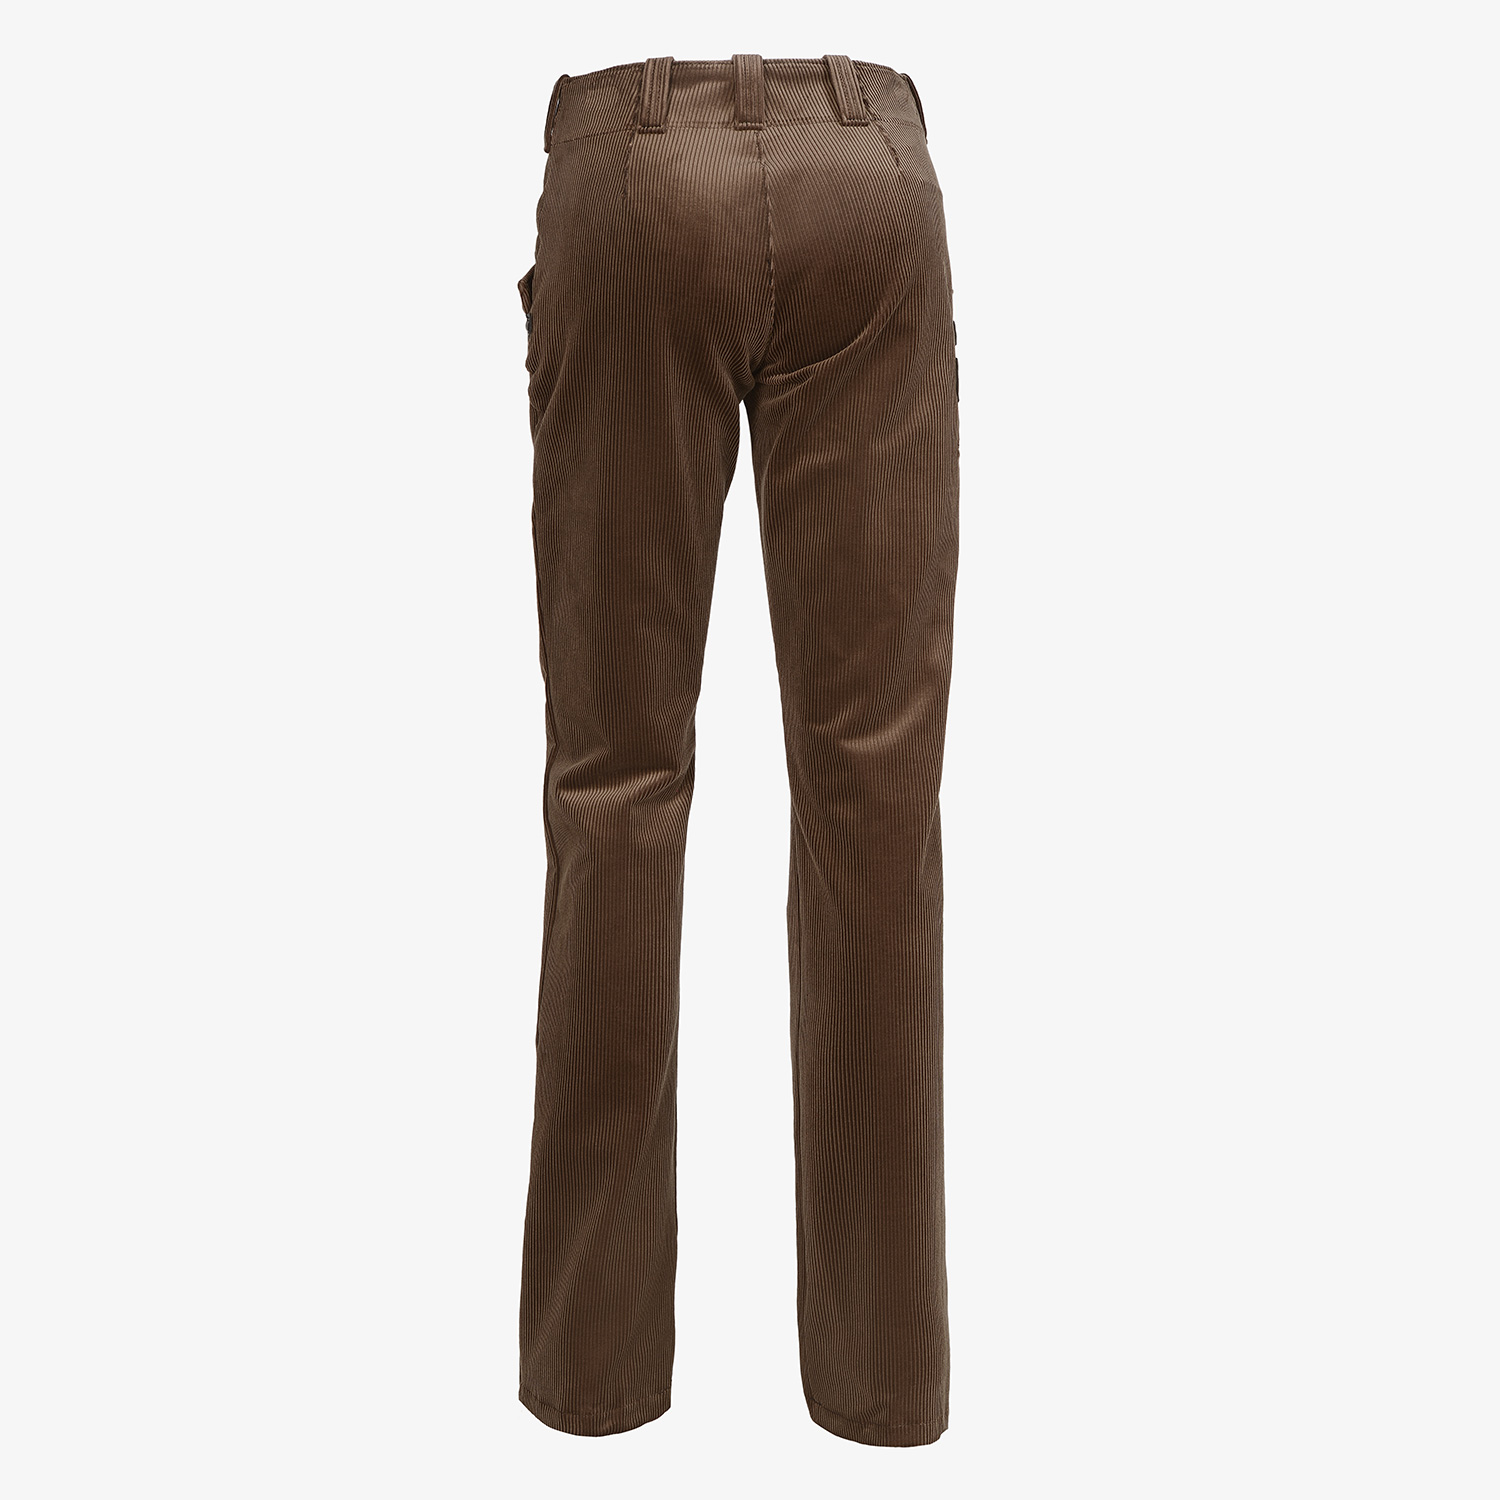 BELLA guild trousers corduroy with spandex